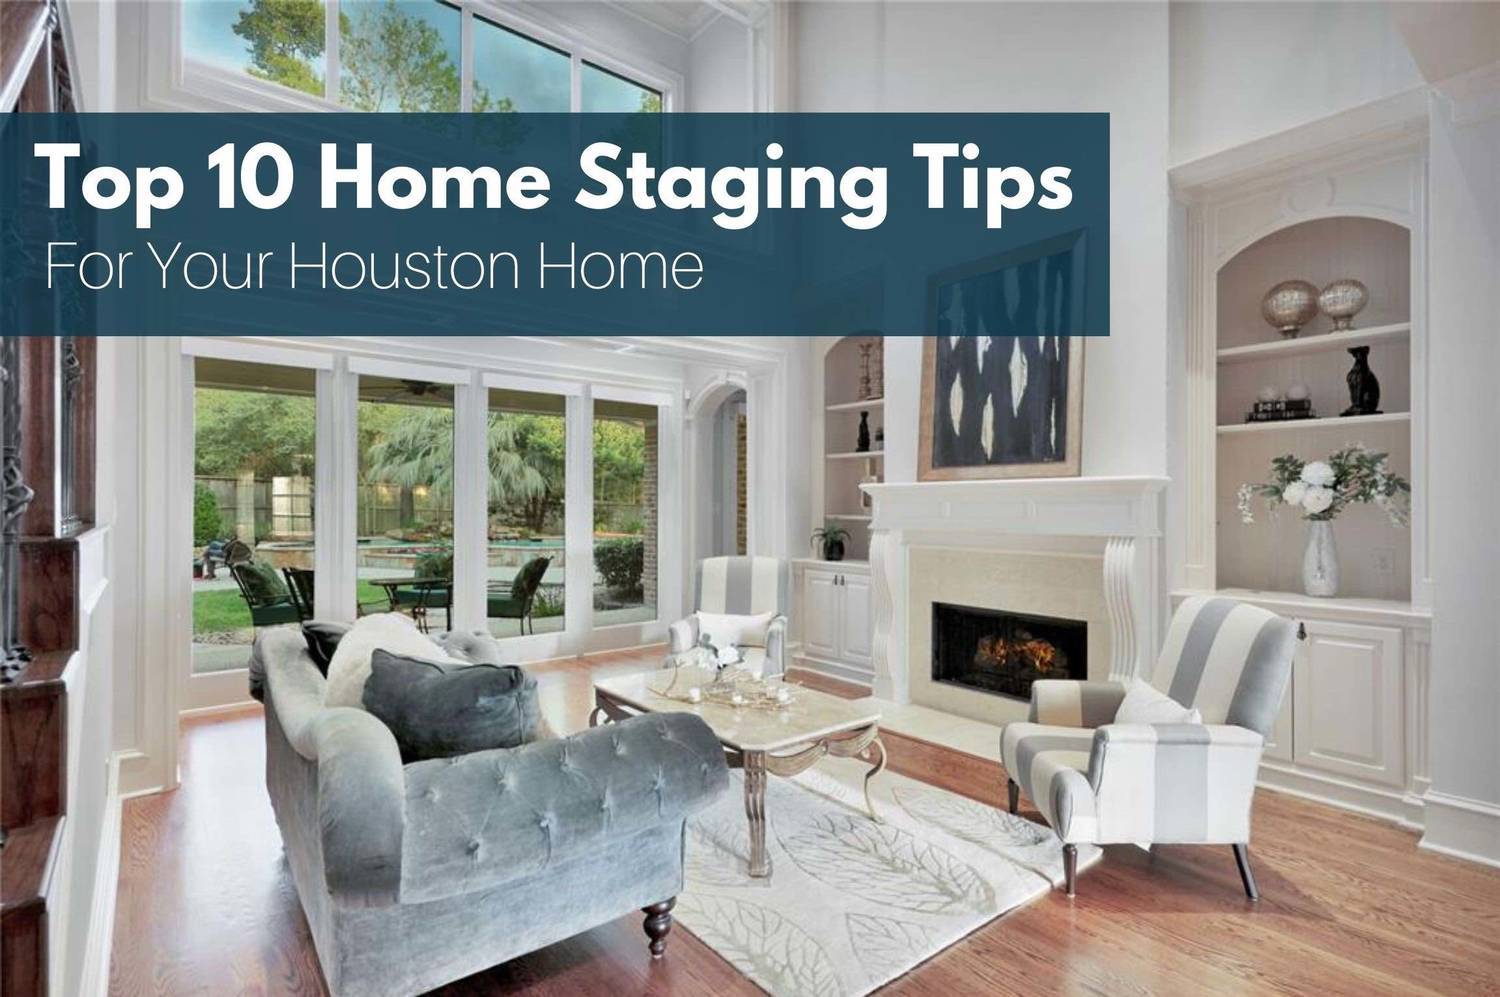 Tips For Selling Your Home Fast: Top 10 Home Staging Ideas To Increase Home Value